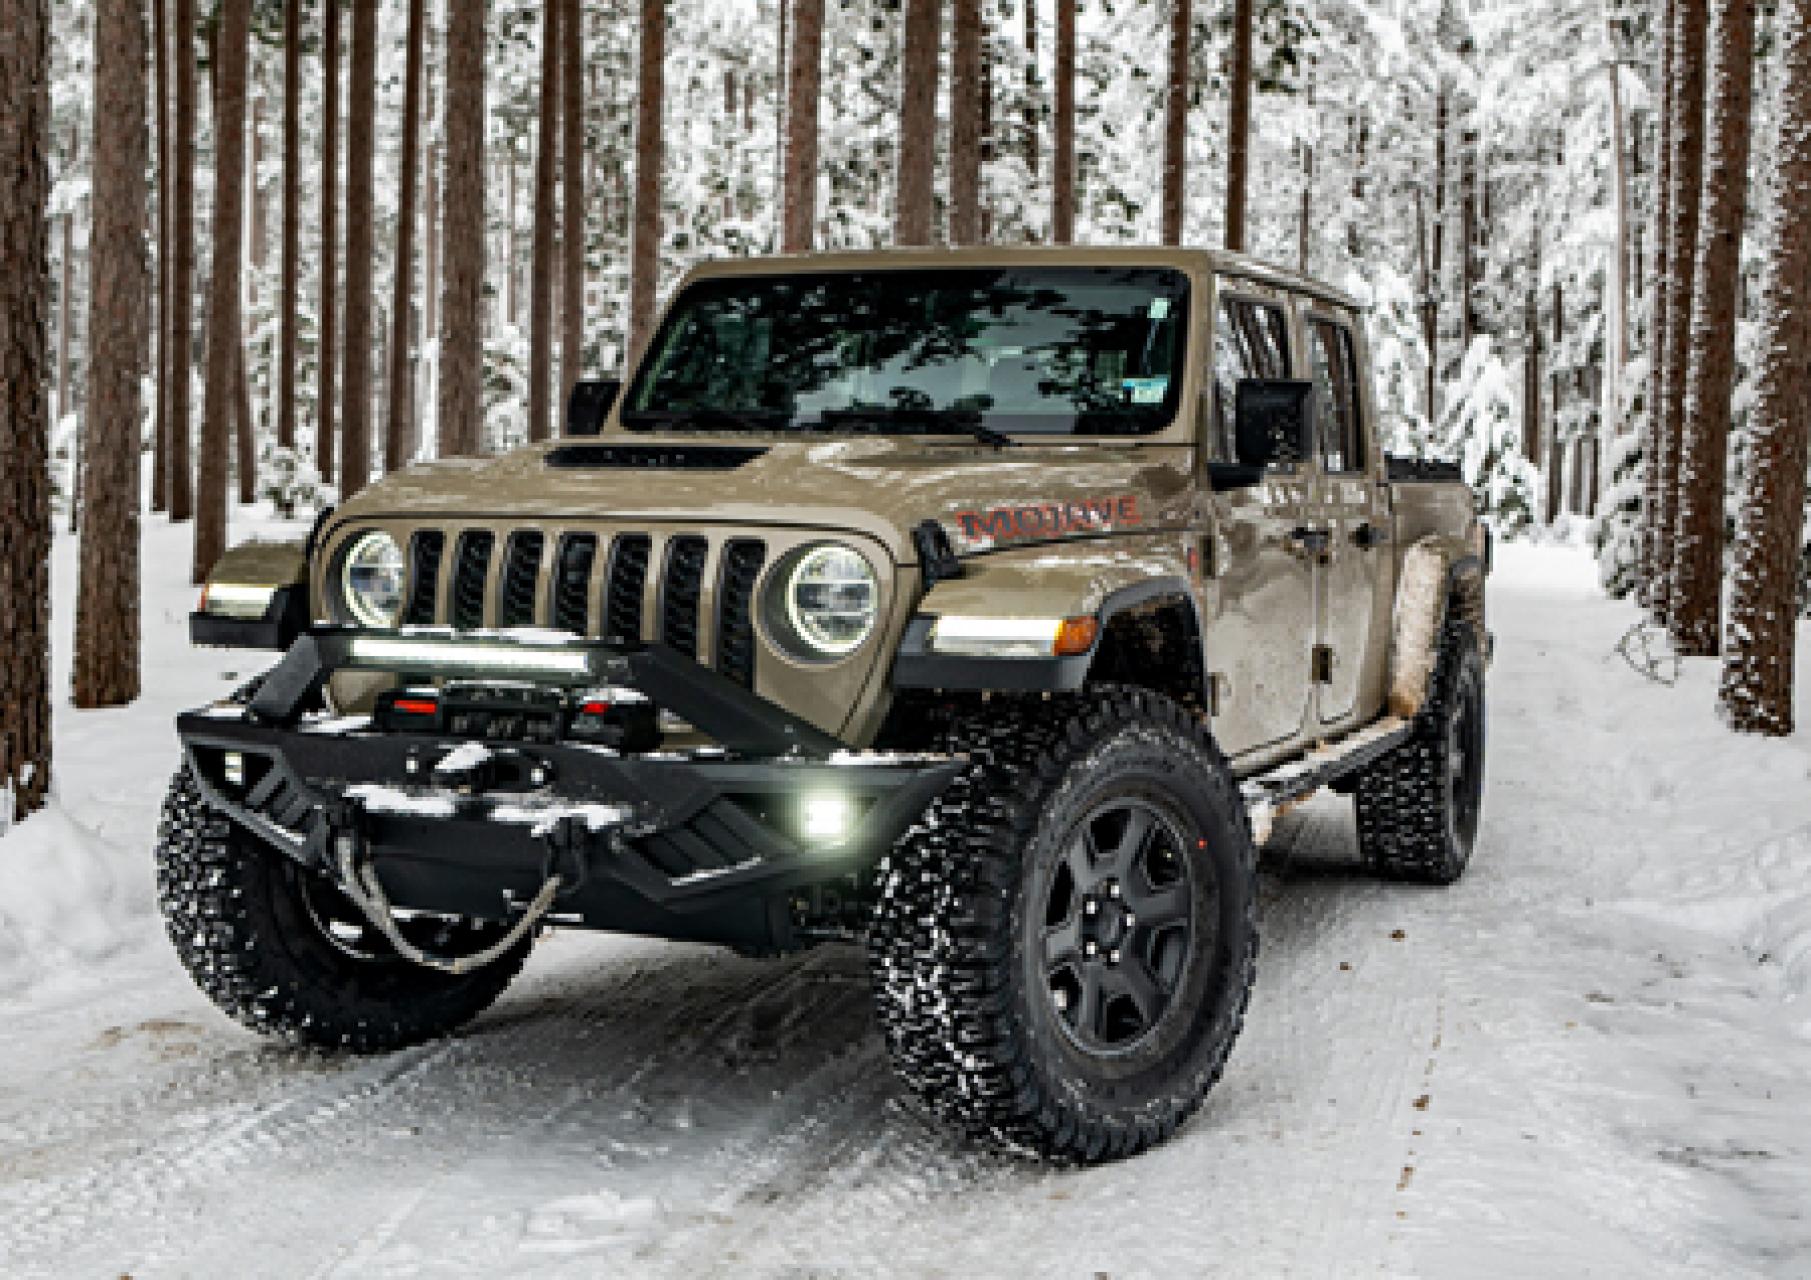 Top 10 Winter Off-Roading Destinations in the States